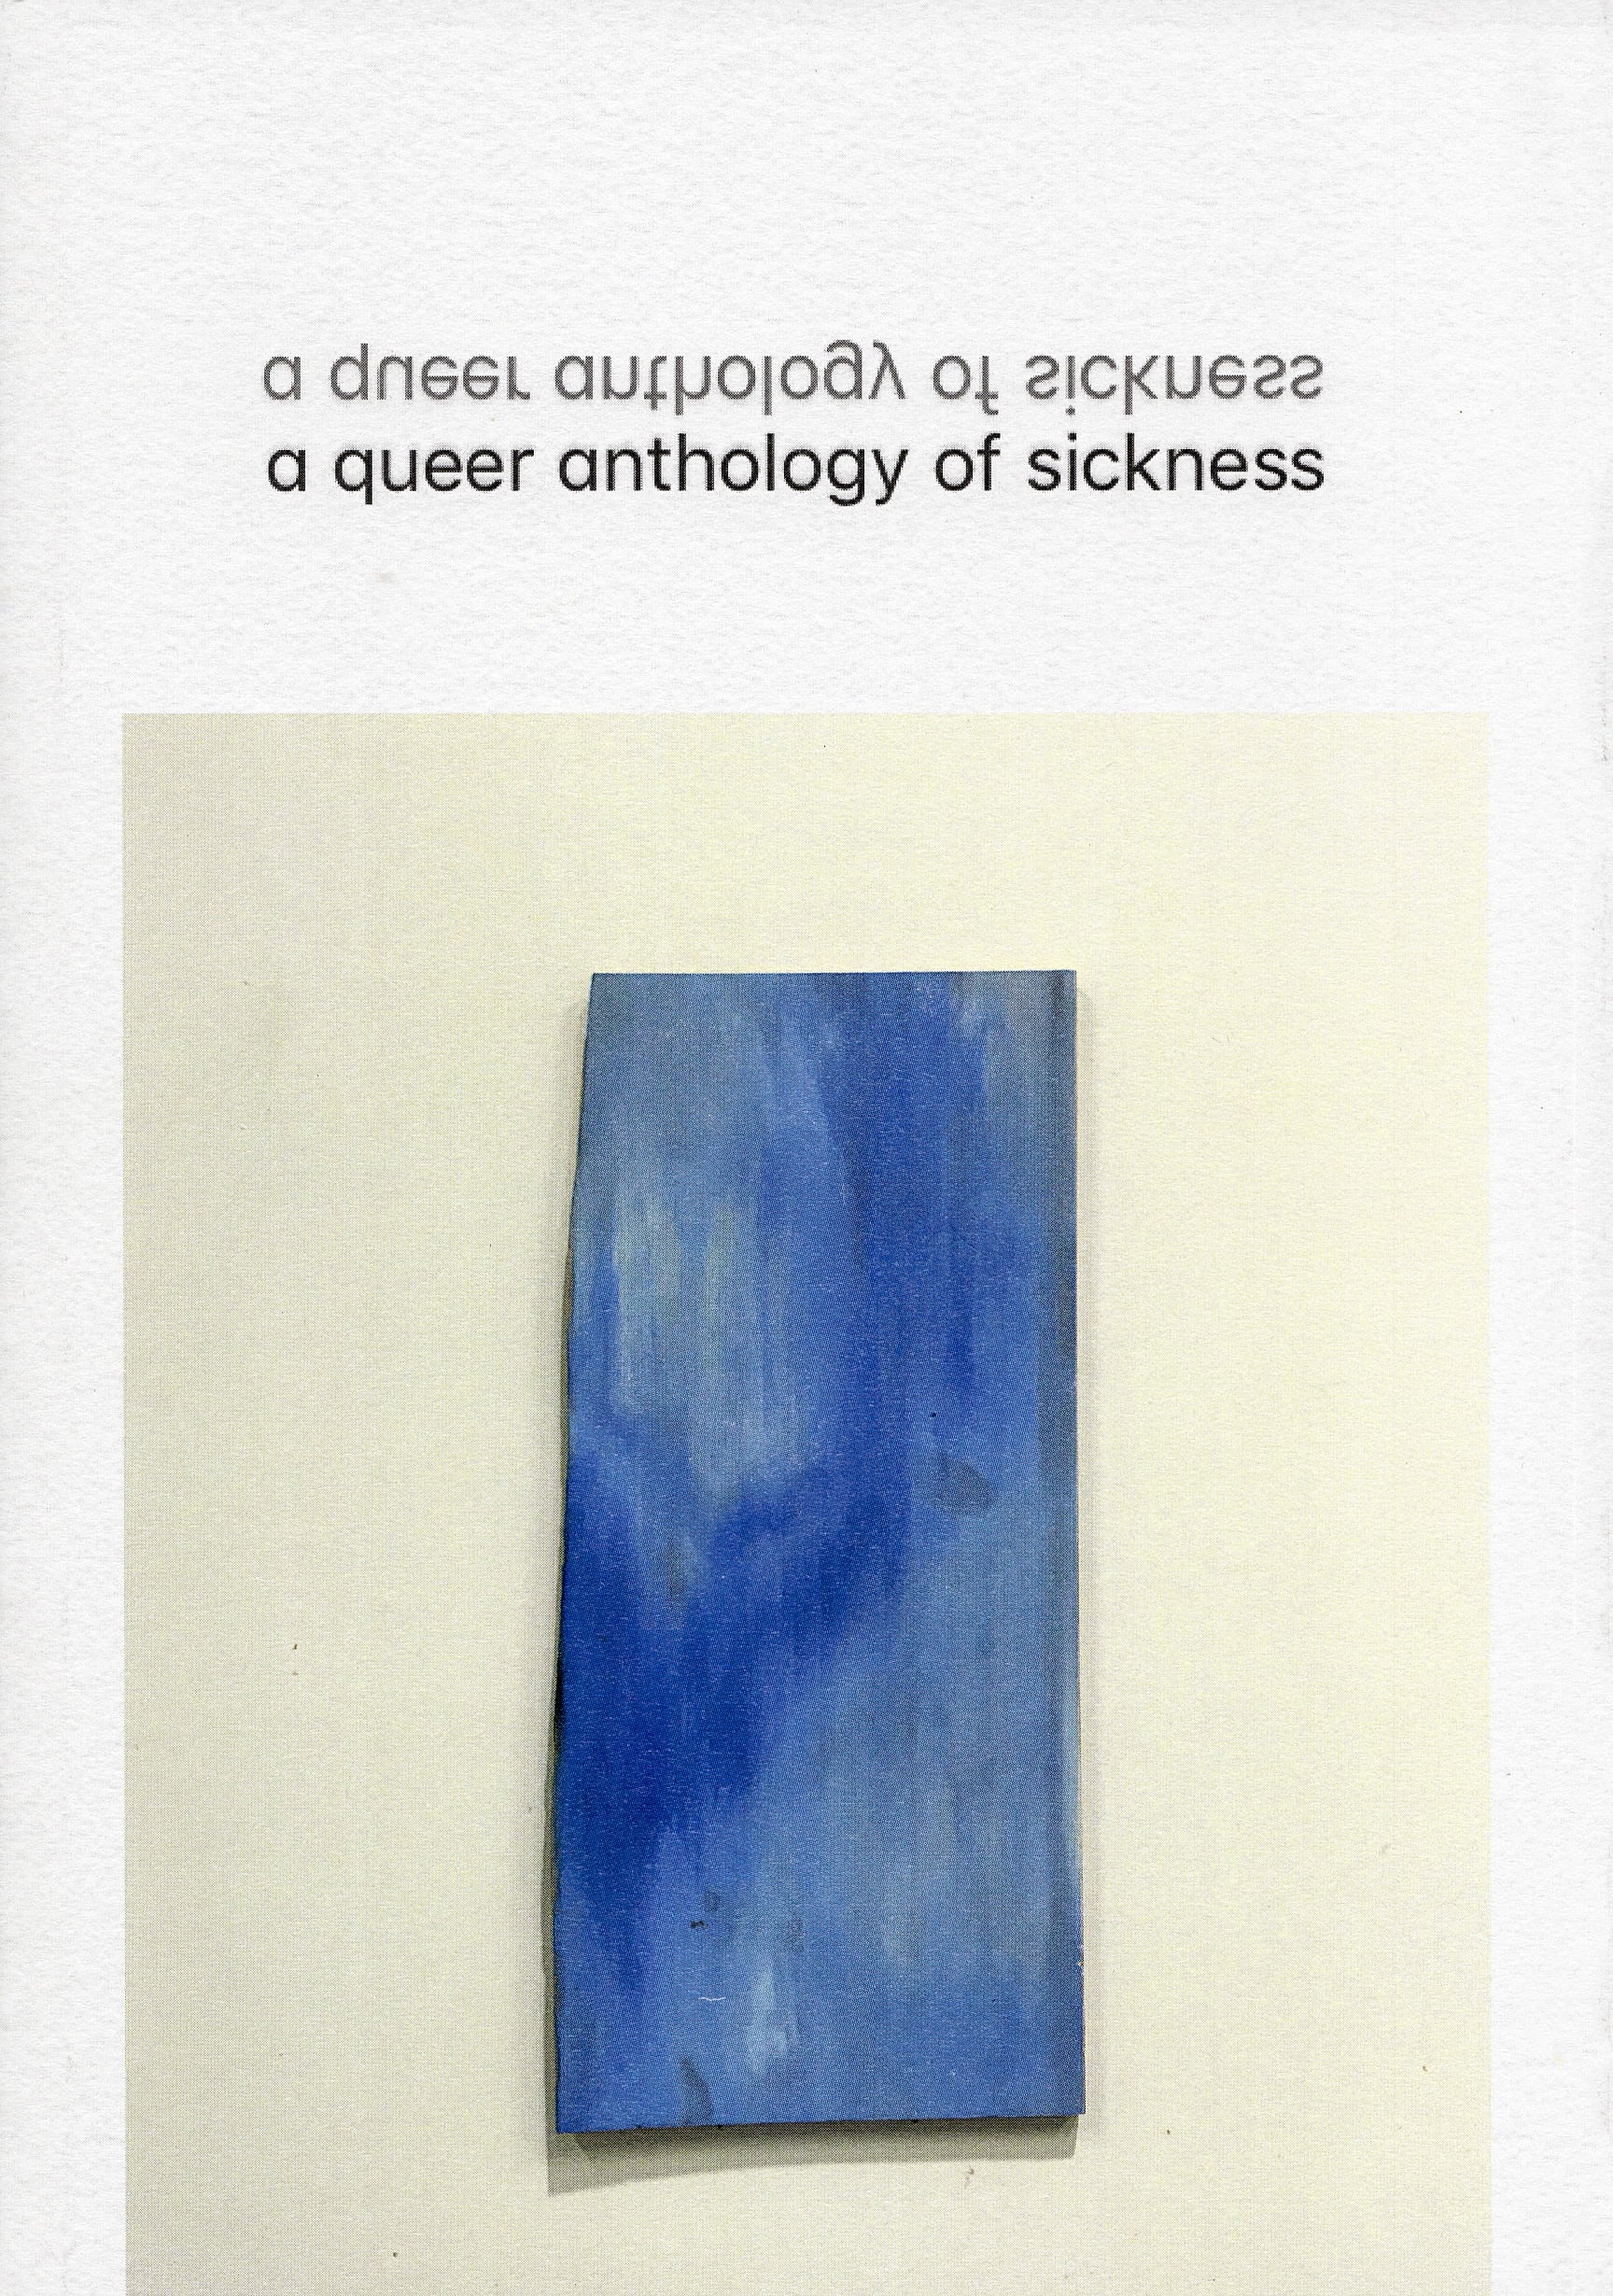 Pilot Press: A Queer Anthology of Sickness